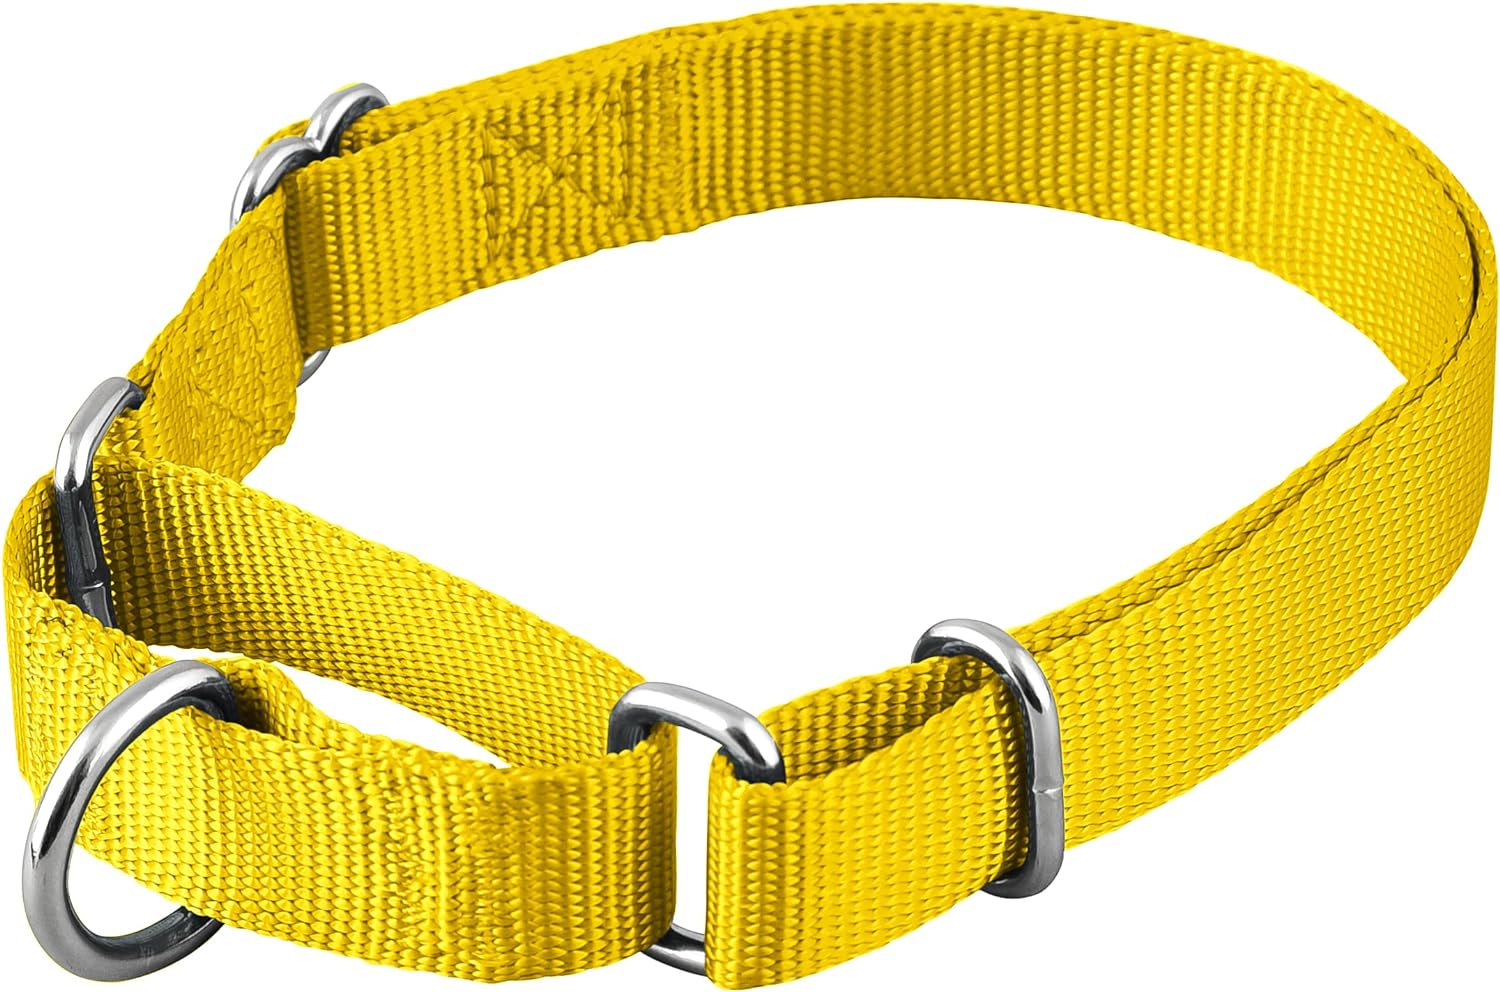 Native Pup Martingale Dog Collar, Adjustable for Small, Medium, Large pet and Puppies Accessories, Cute Colors for Male, Female, boy, Girl, Puppy (Large, Bright Yellow)